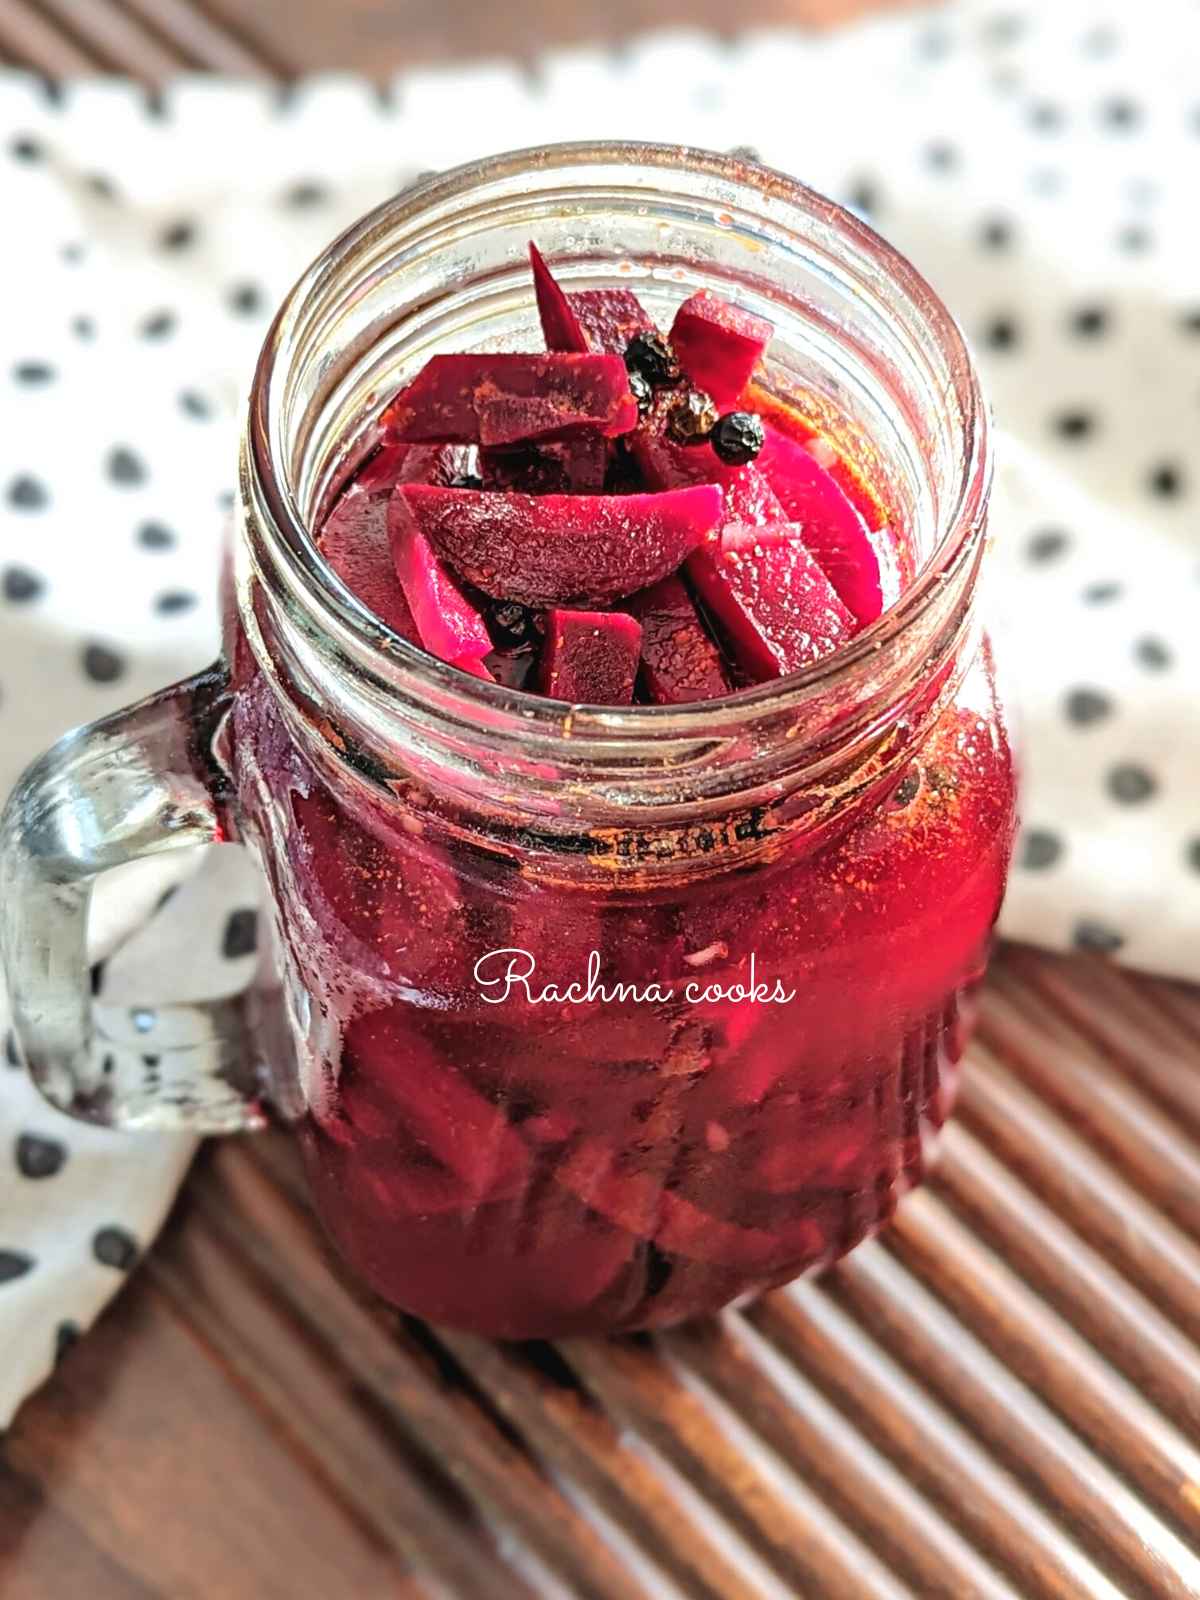 Delicious pickled beetroot batons in vinegar in a mason jar.